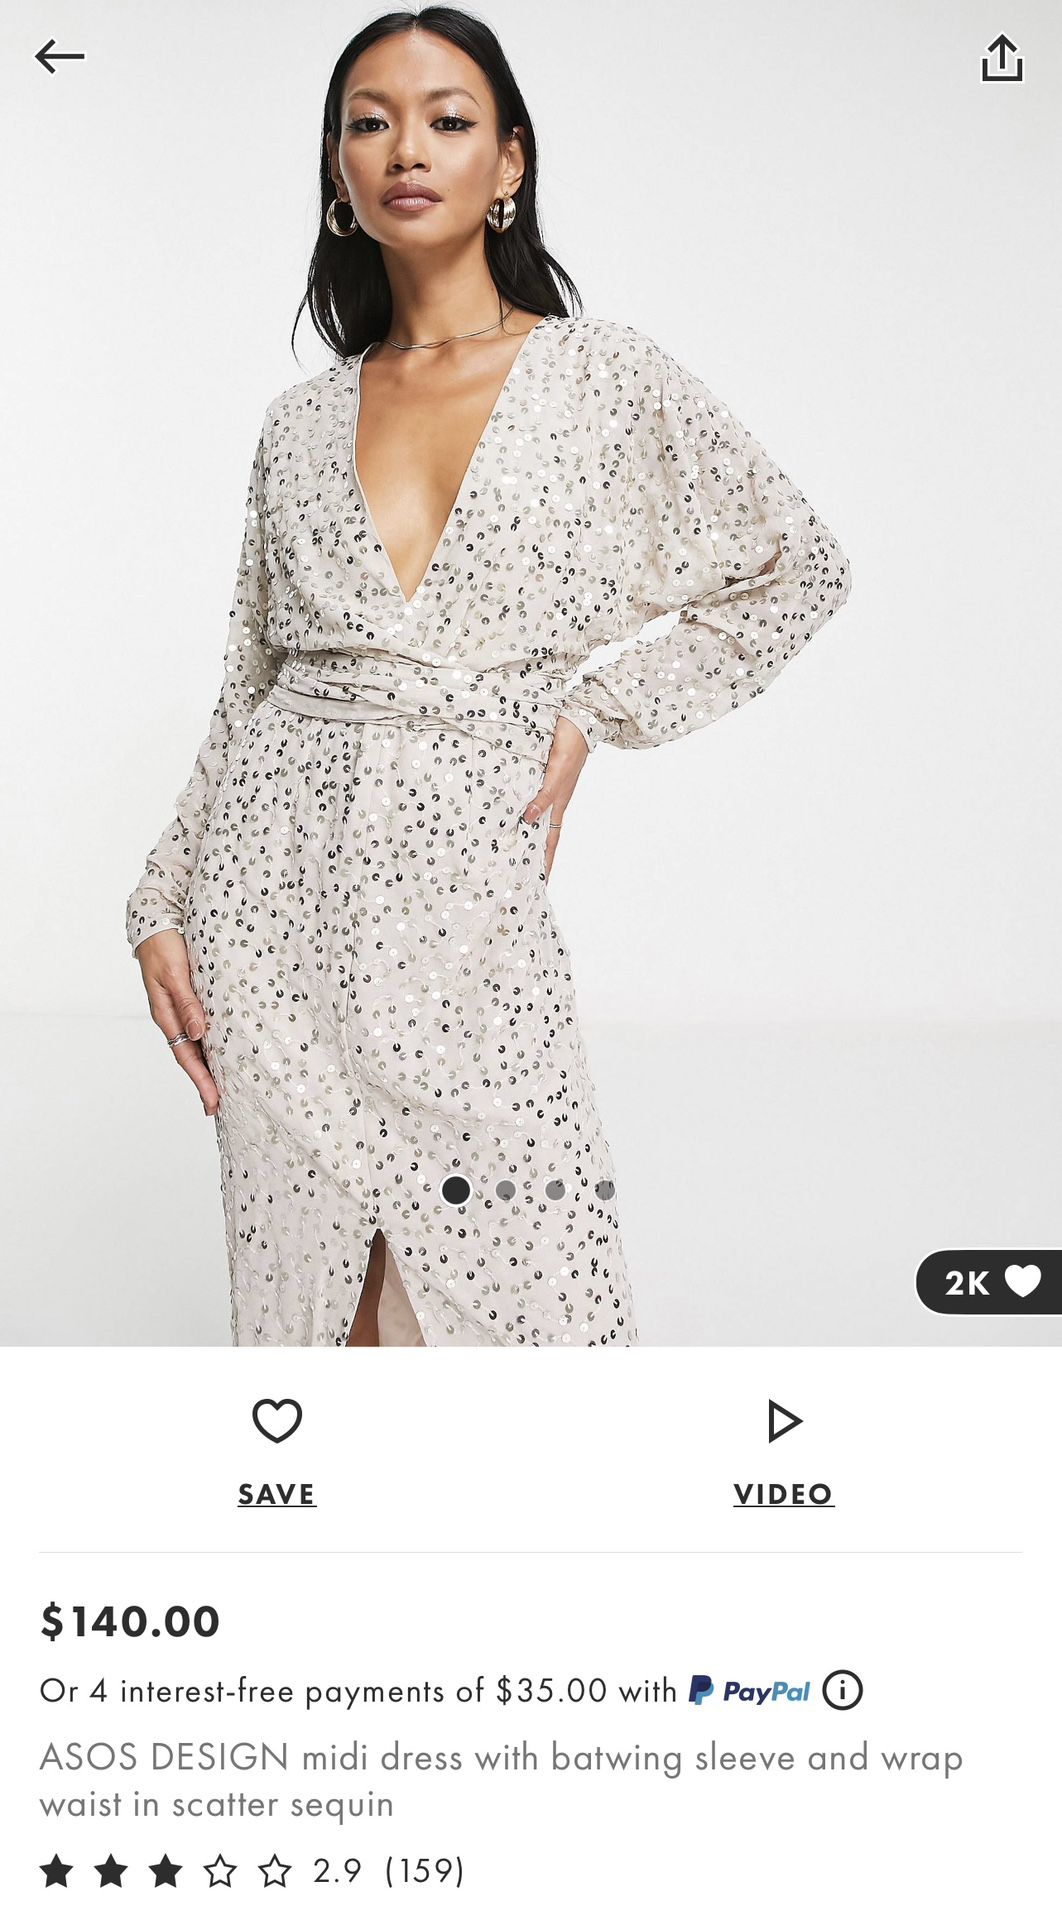 ASOS DESIGN midi dress with batwing sleeve and wrap waist in scatter sequin.